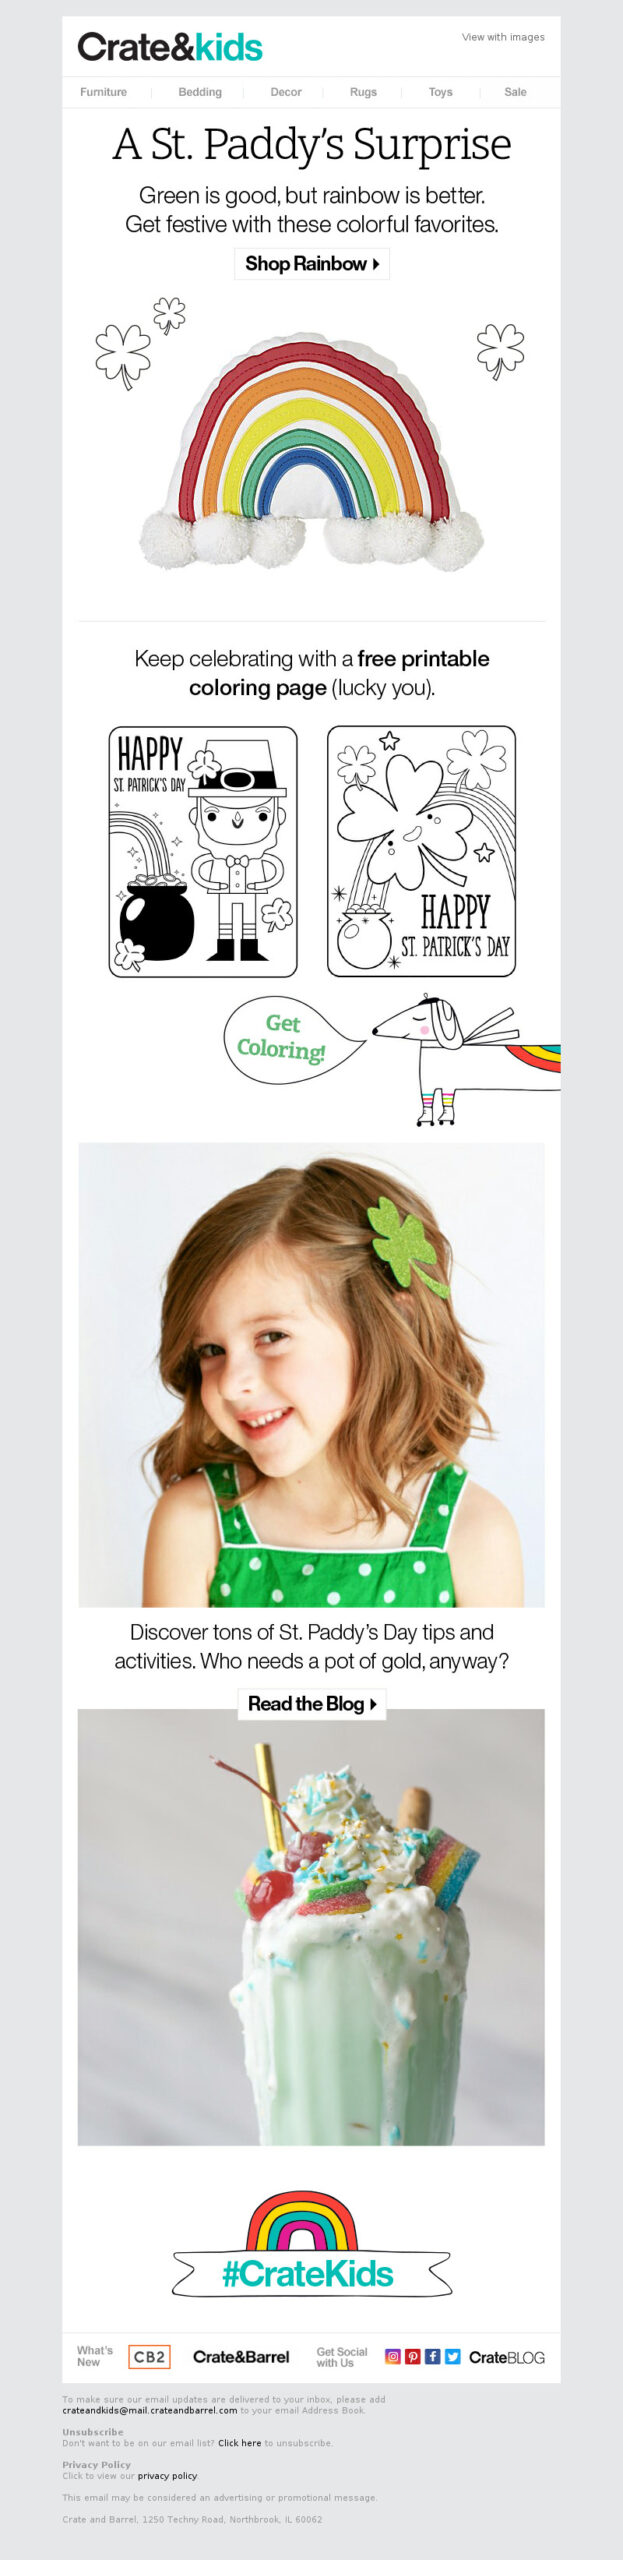 Crate&Kids St. Patrick's Day free printable coloring pages and rainbow-themed items email promotion.